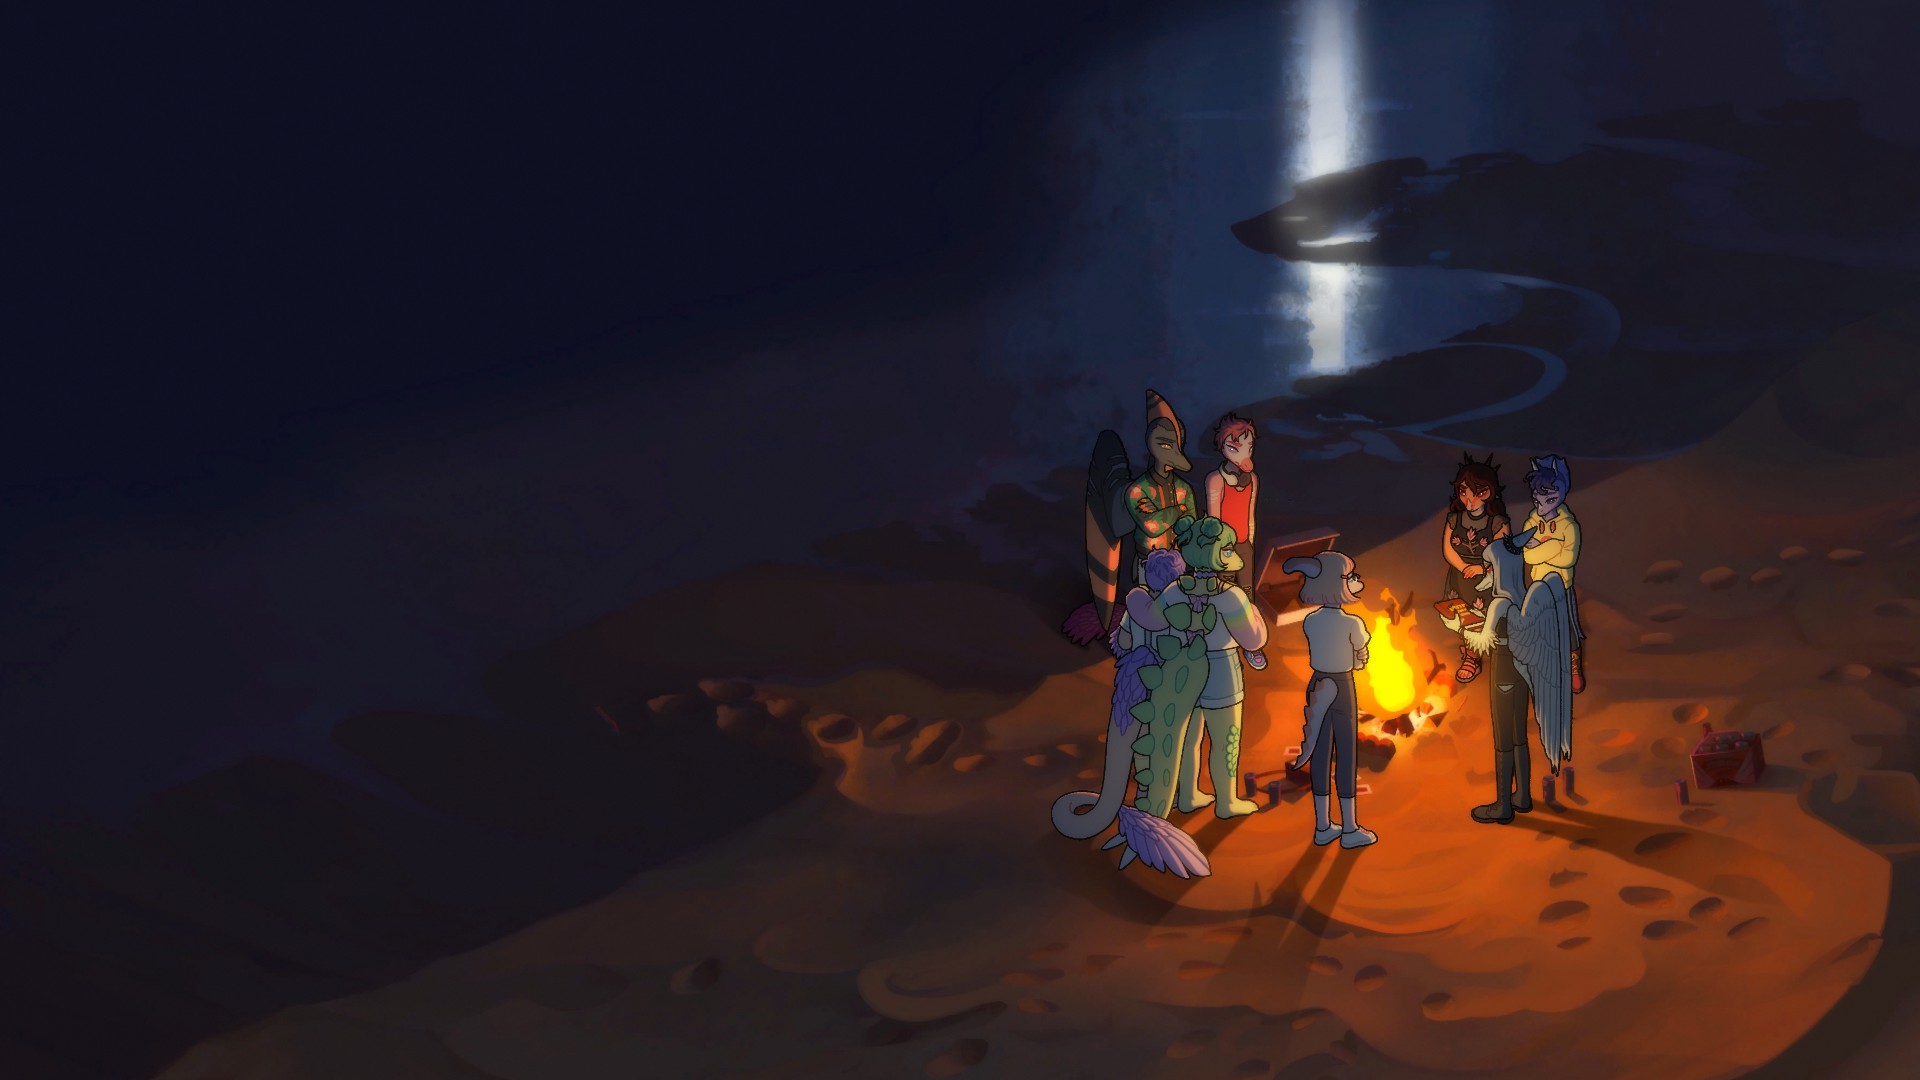 The cast of Goodbye, Volcano High standing by a campfire on the beach at night